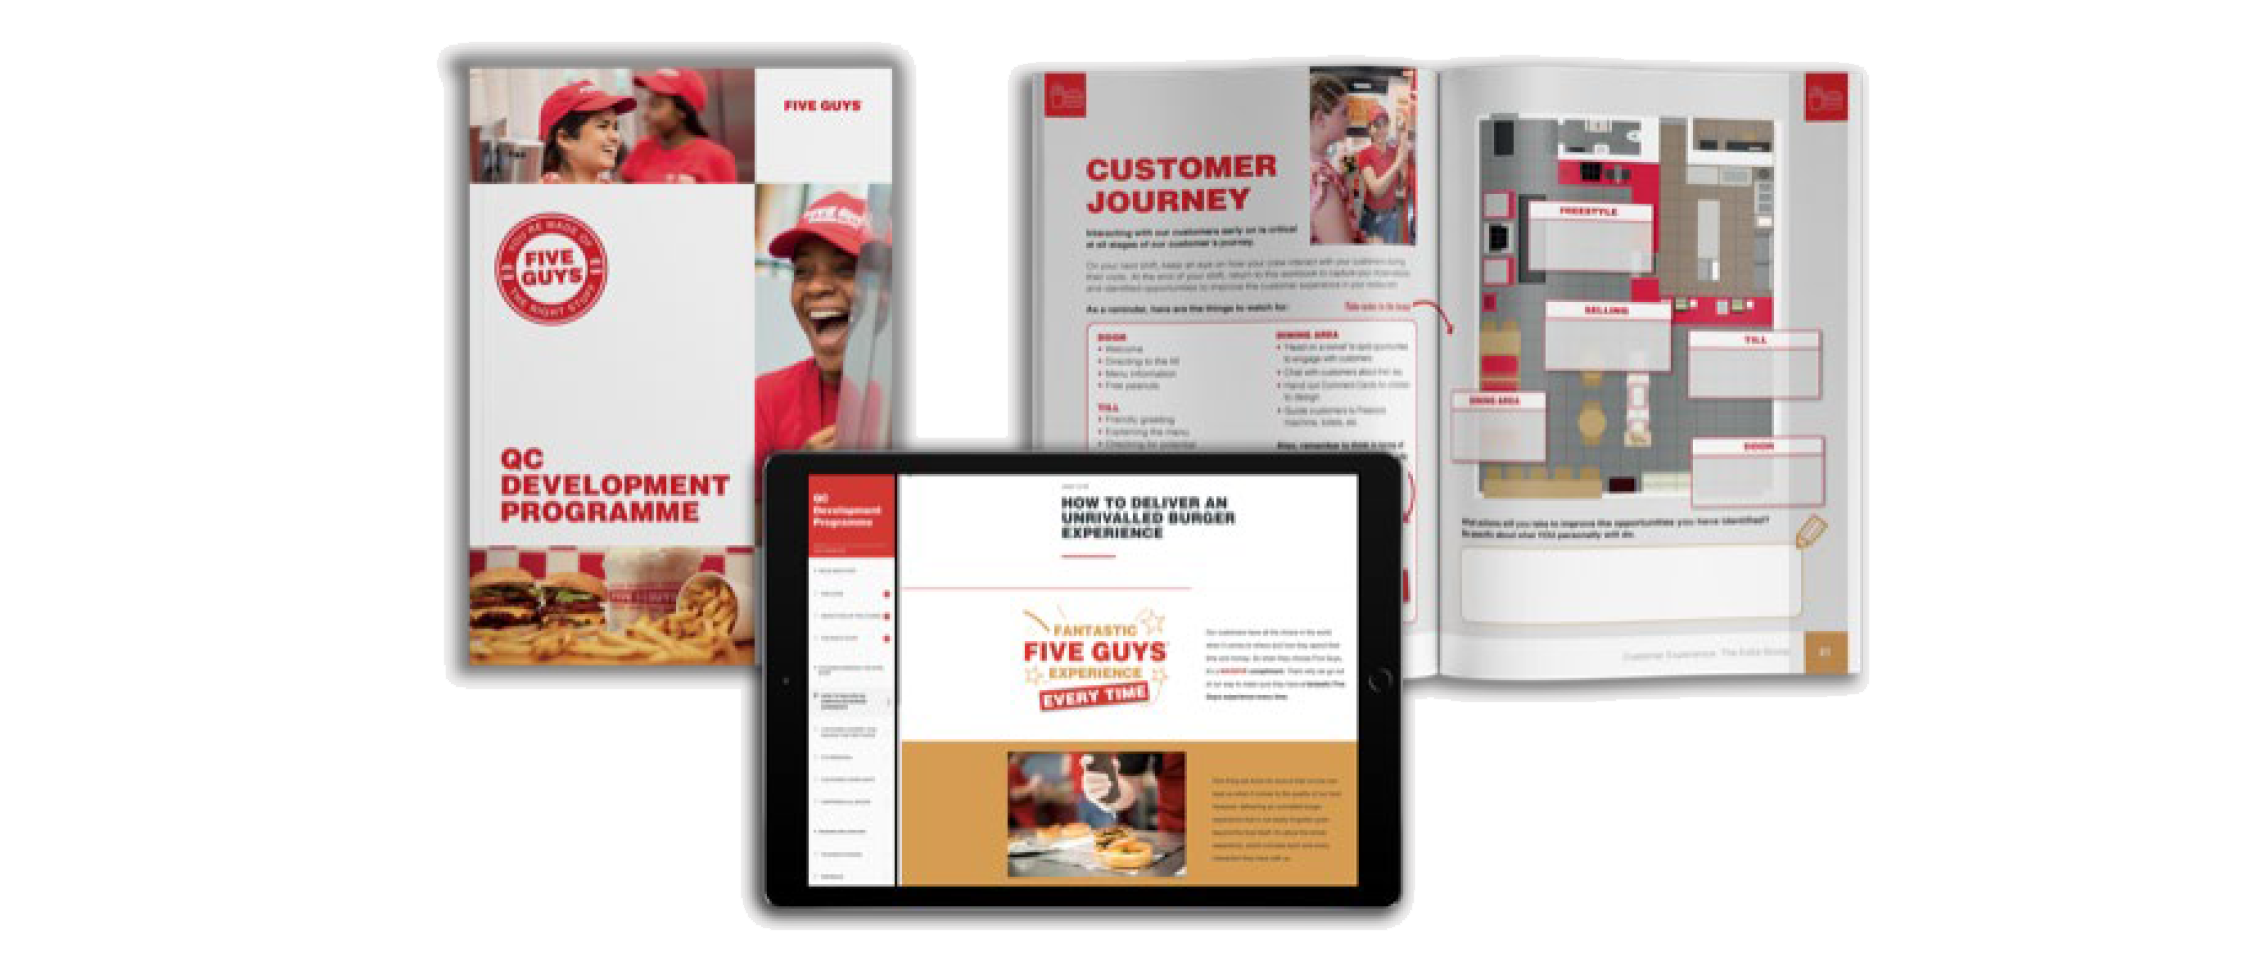 Five Guys materials; the QC Development Programme workbook and a tablet with eLearning "how to deliver an unrivalled burger experience"